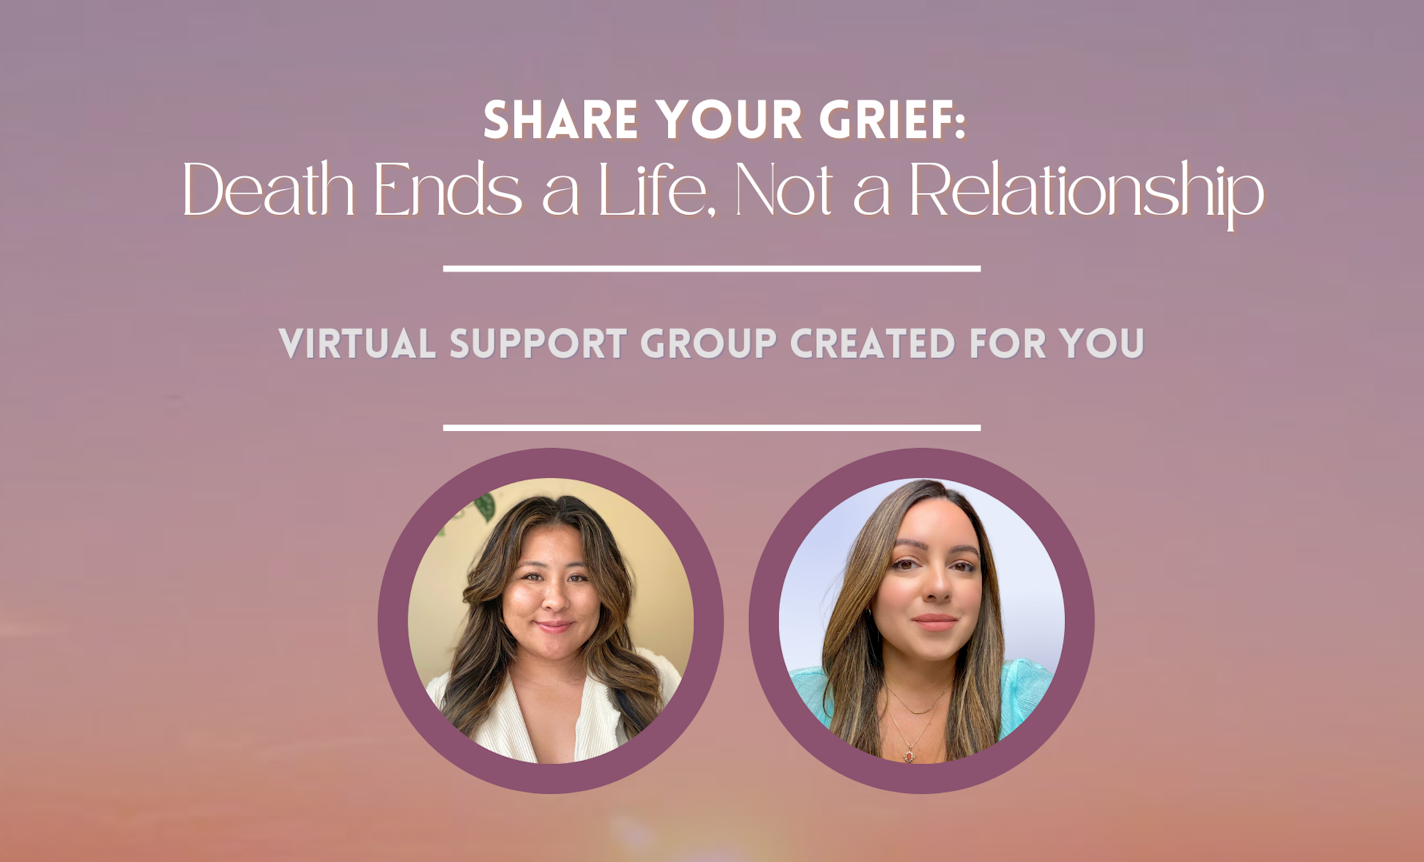 Death ends a life, not a relationship | Grief Support